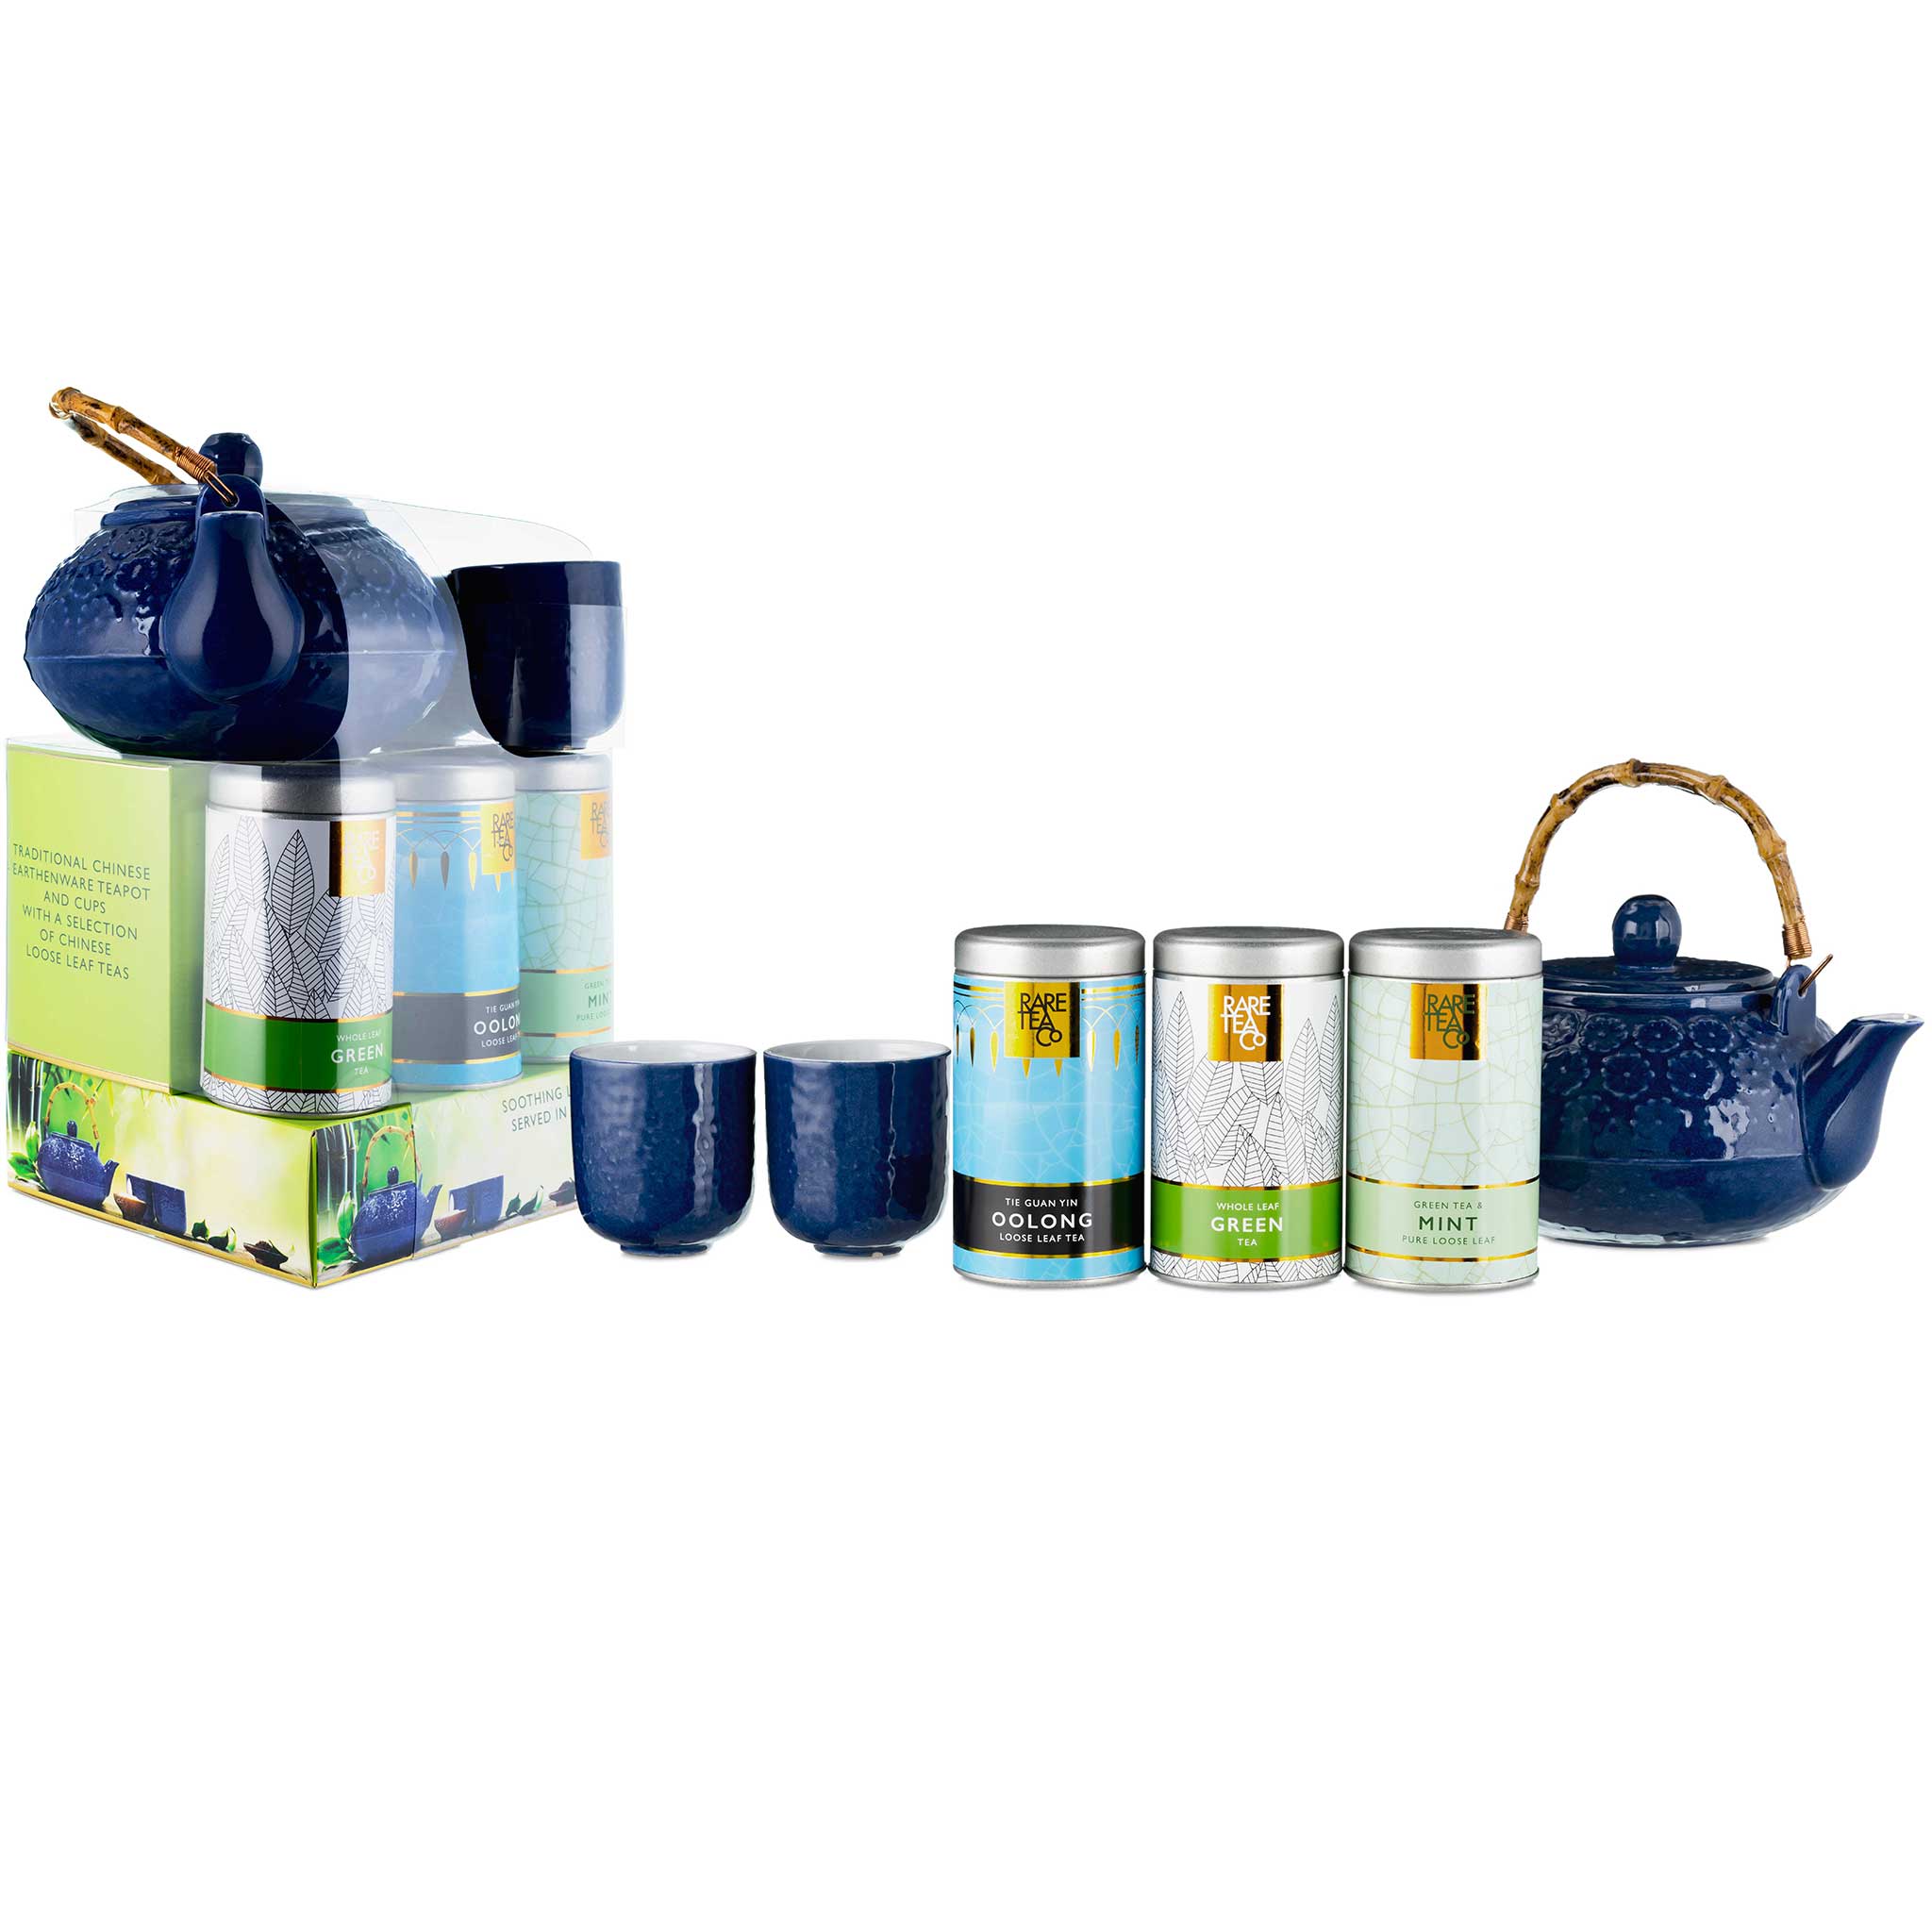 Blue teapot with infuser and two cup with a selection of teas